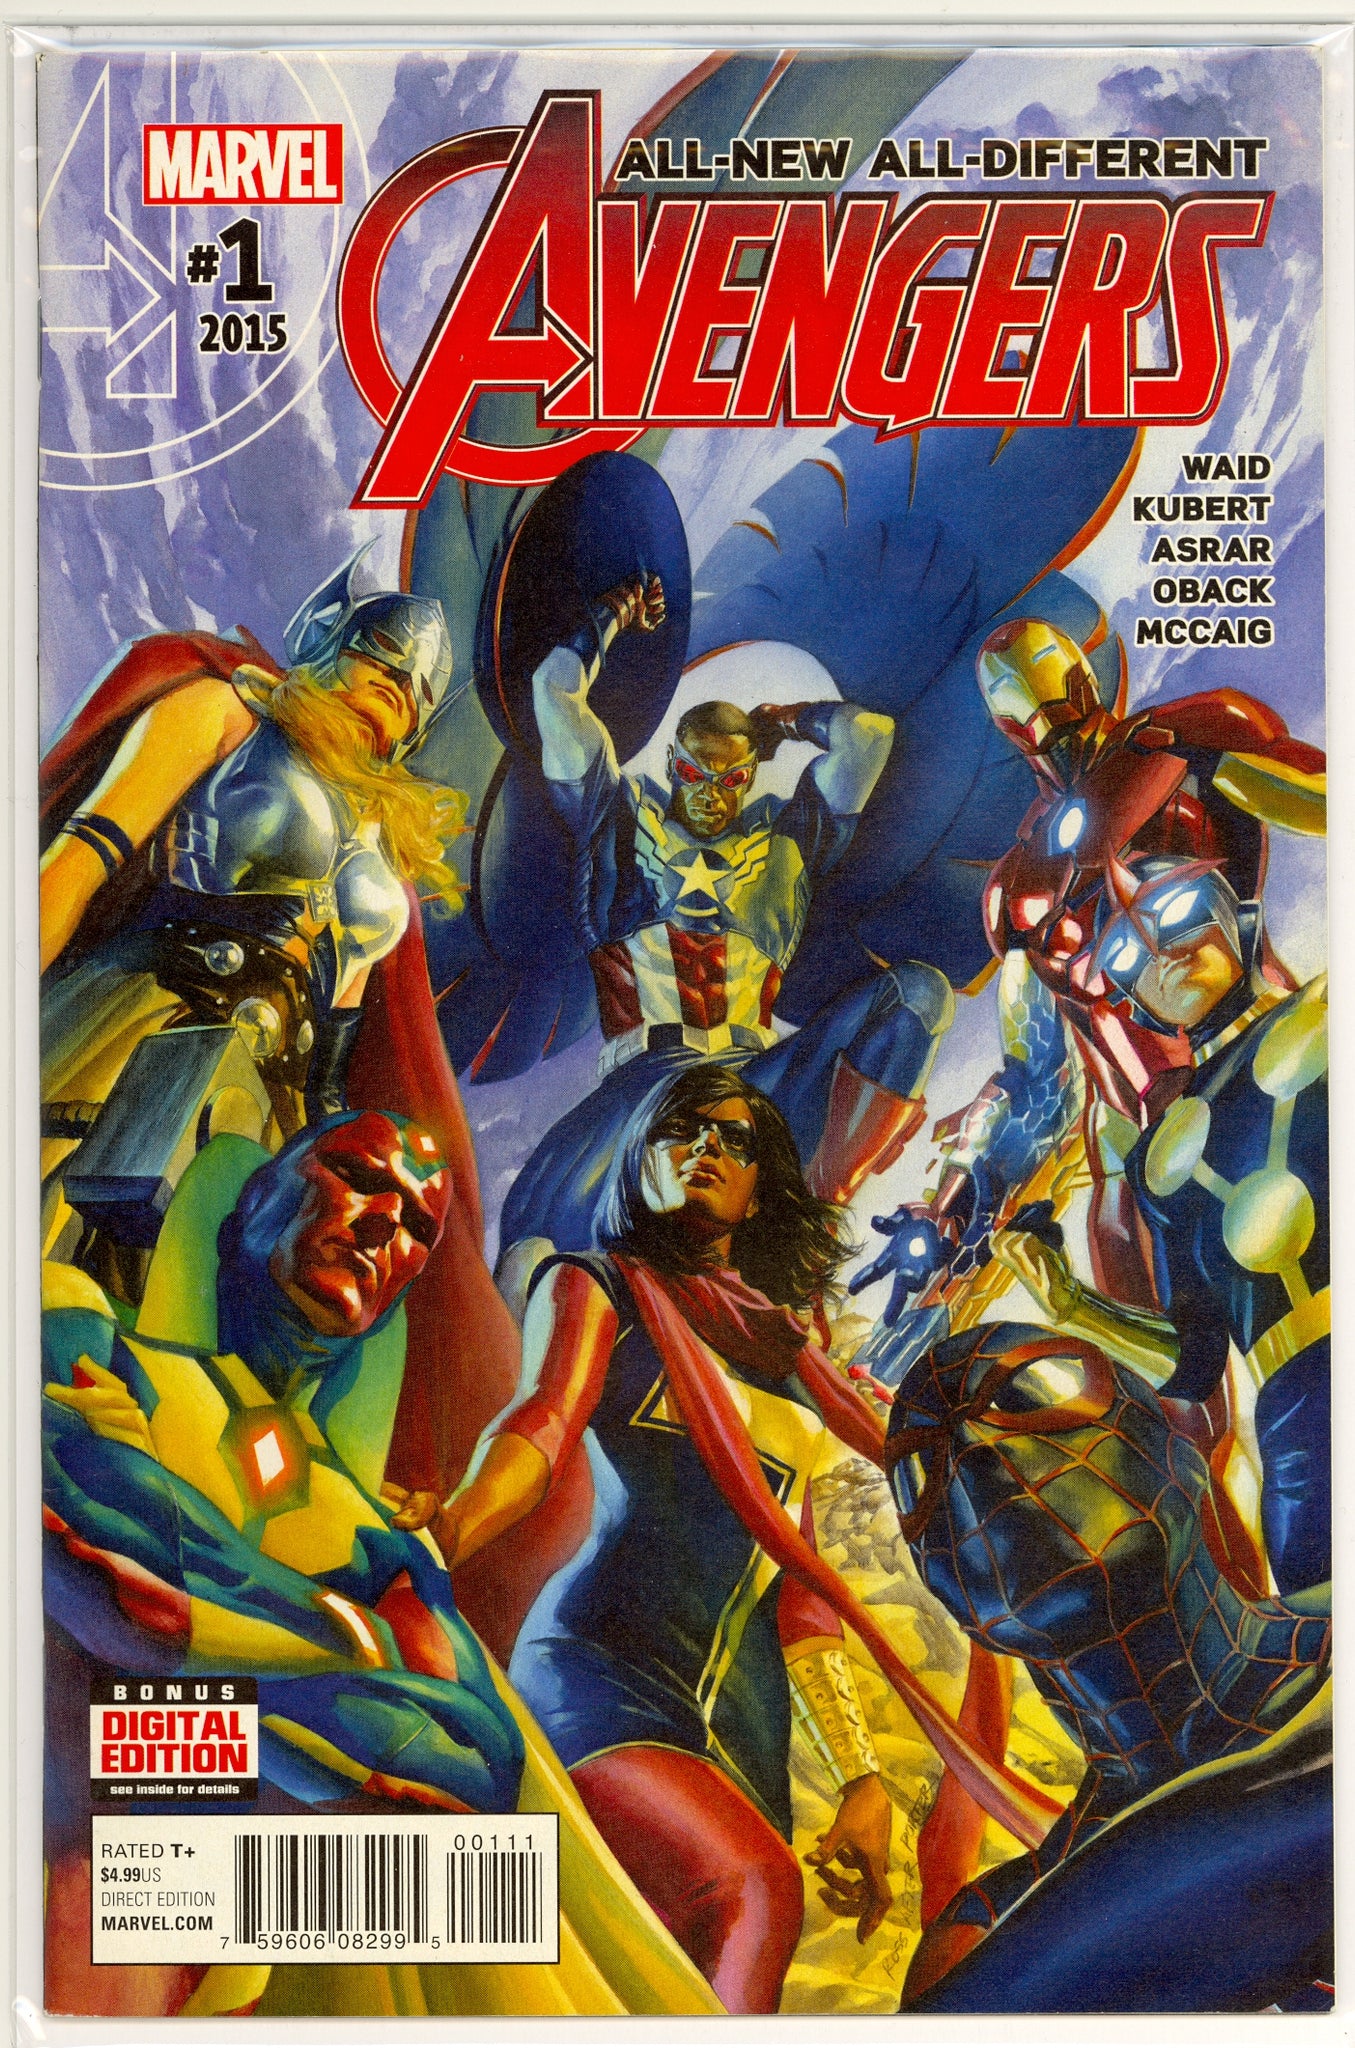 All New, All Different Avengers #1 (2015)